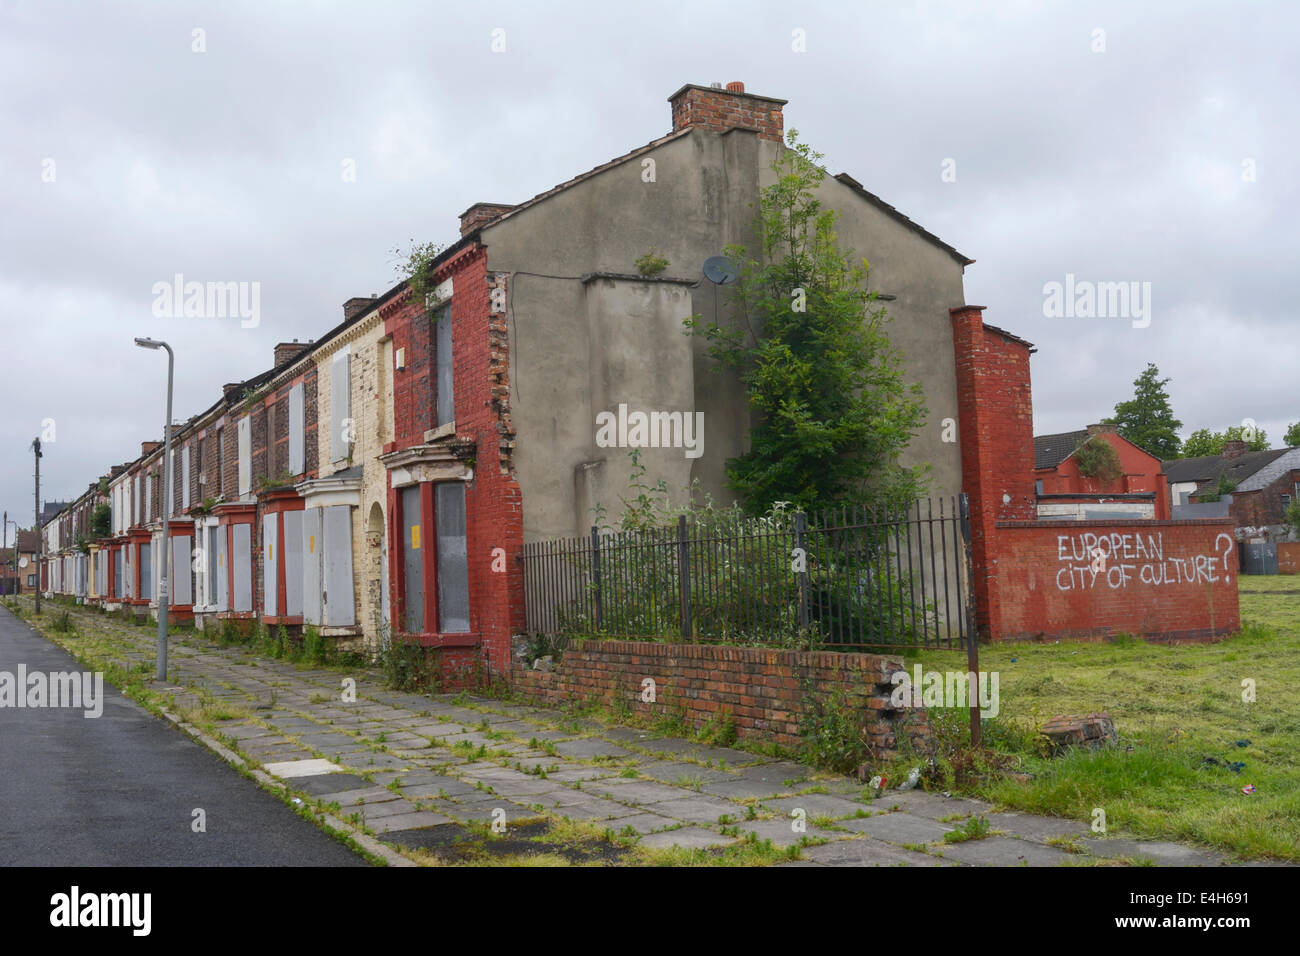 An area of Toxteth in Liverpool 8 known as The Welsh Streets due to the streets being named after towns in Wales. Stock Photo